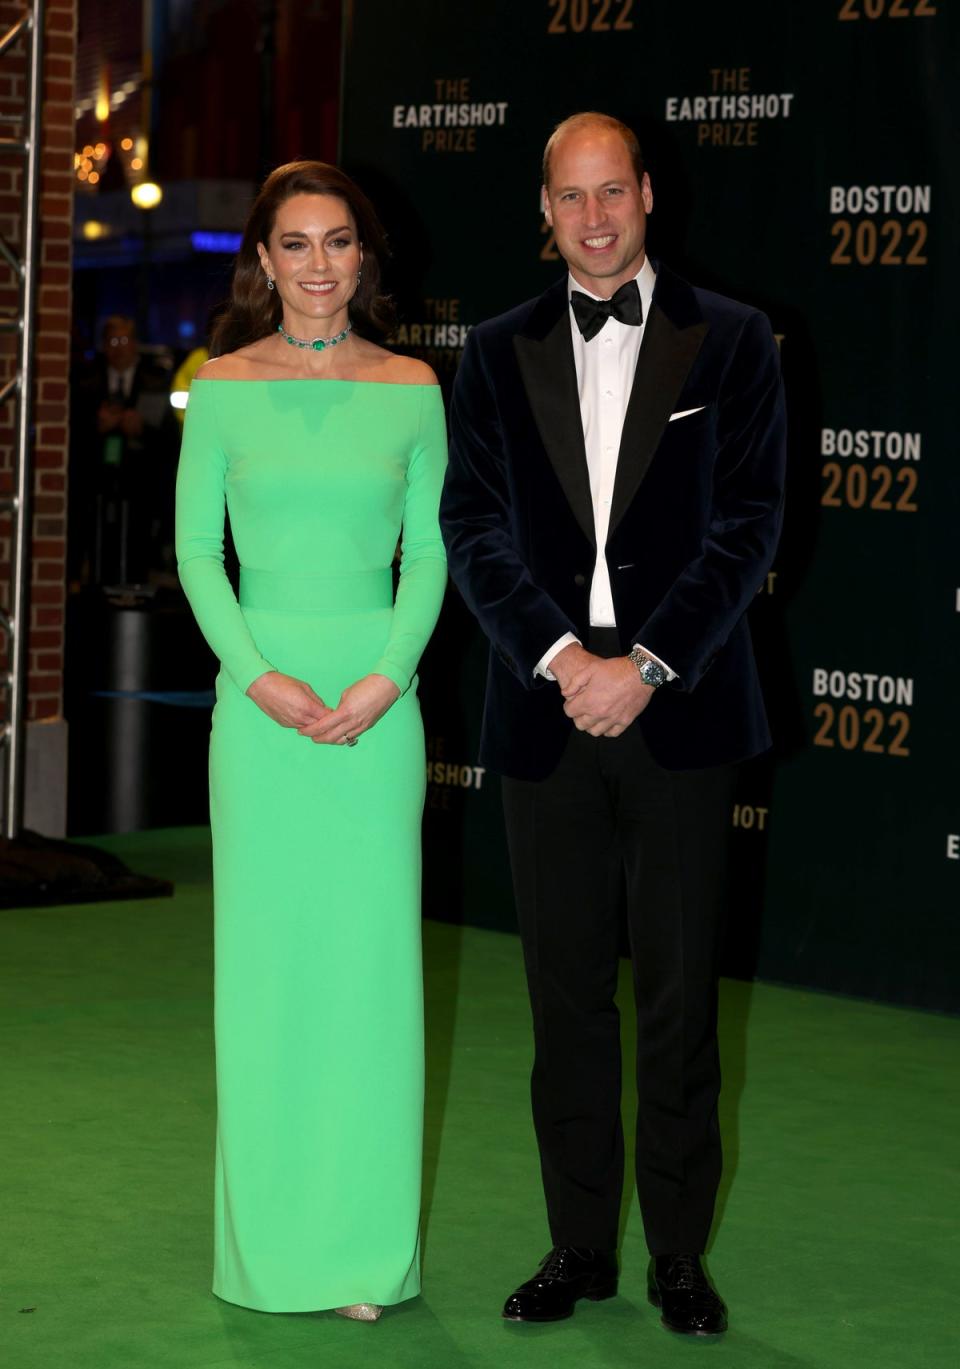 Prince William and Kate arrive at the 2022 Earthshot Prize ceremony (Getty Images)